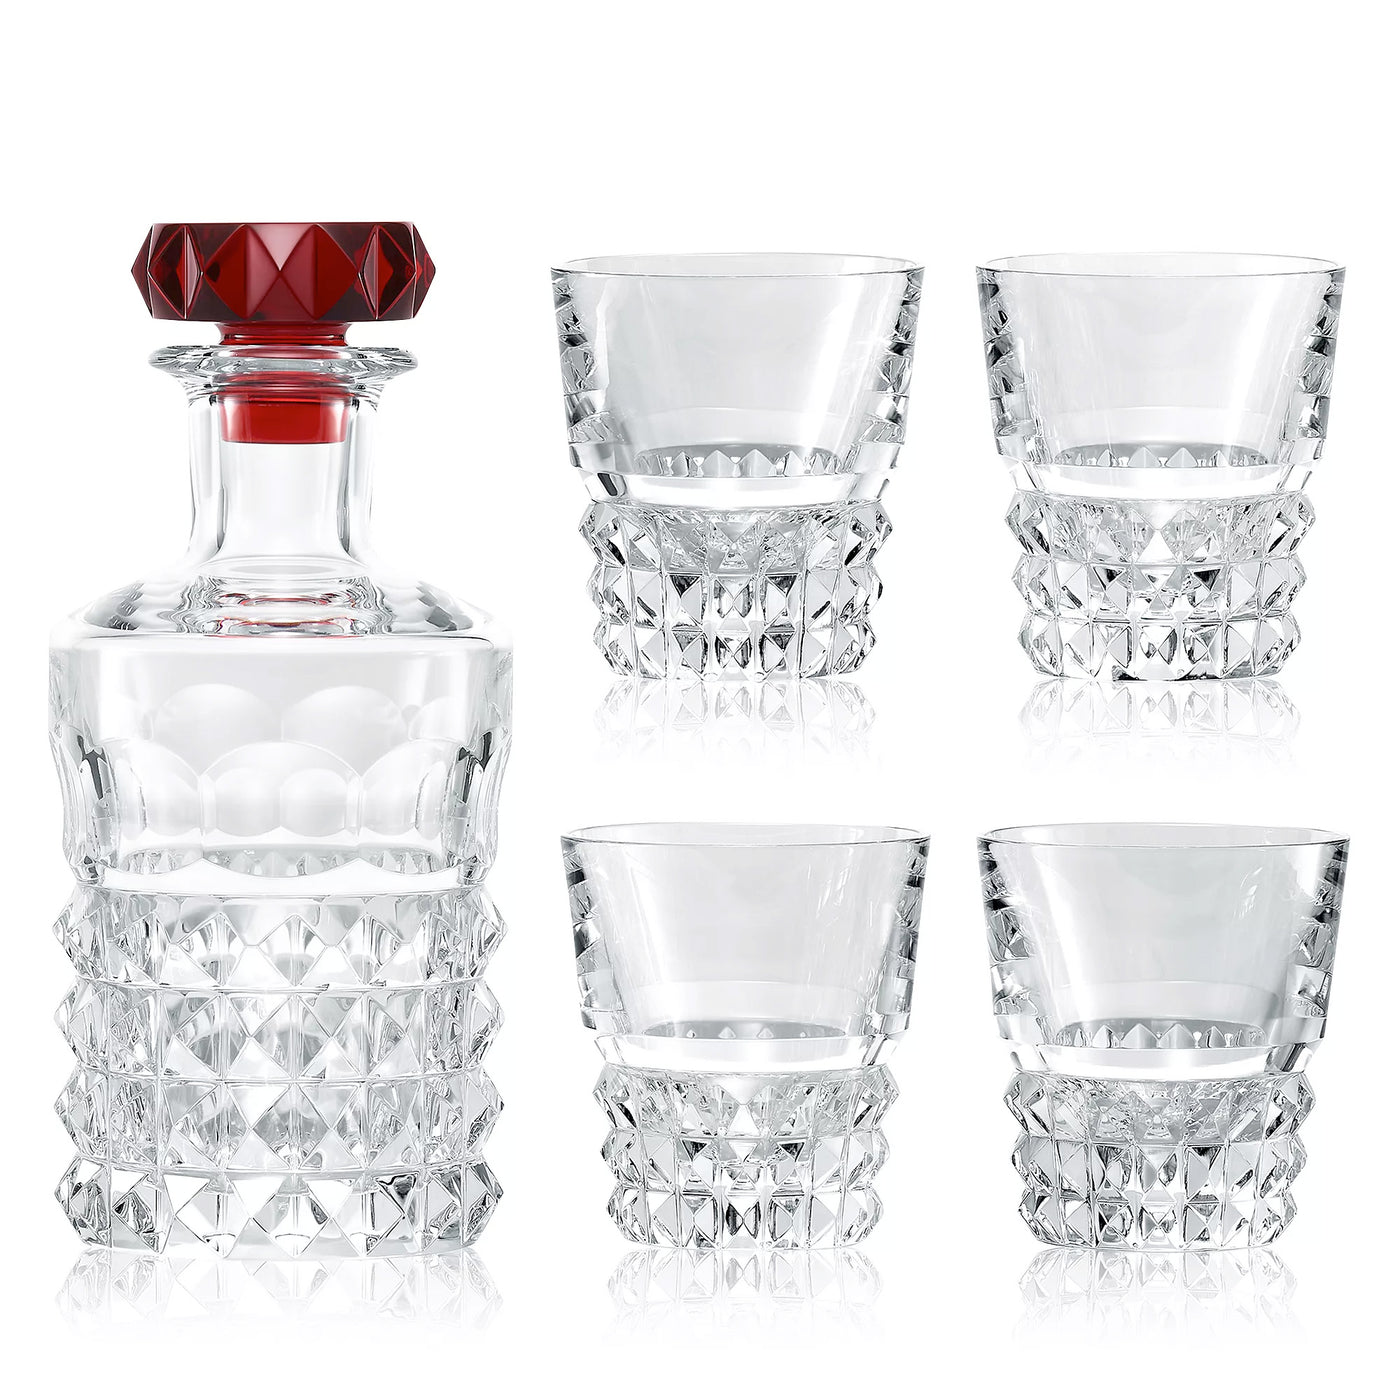 Louxor Red Bar Set with Decanter and 4 Tumblers